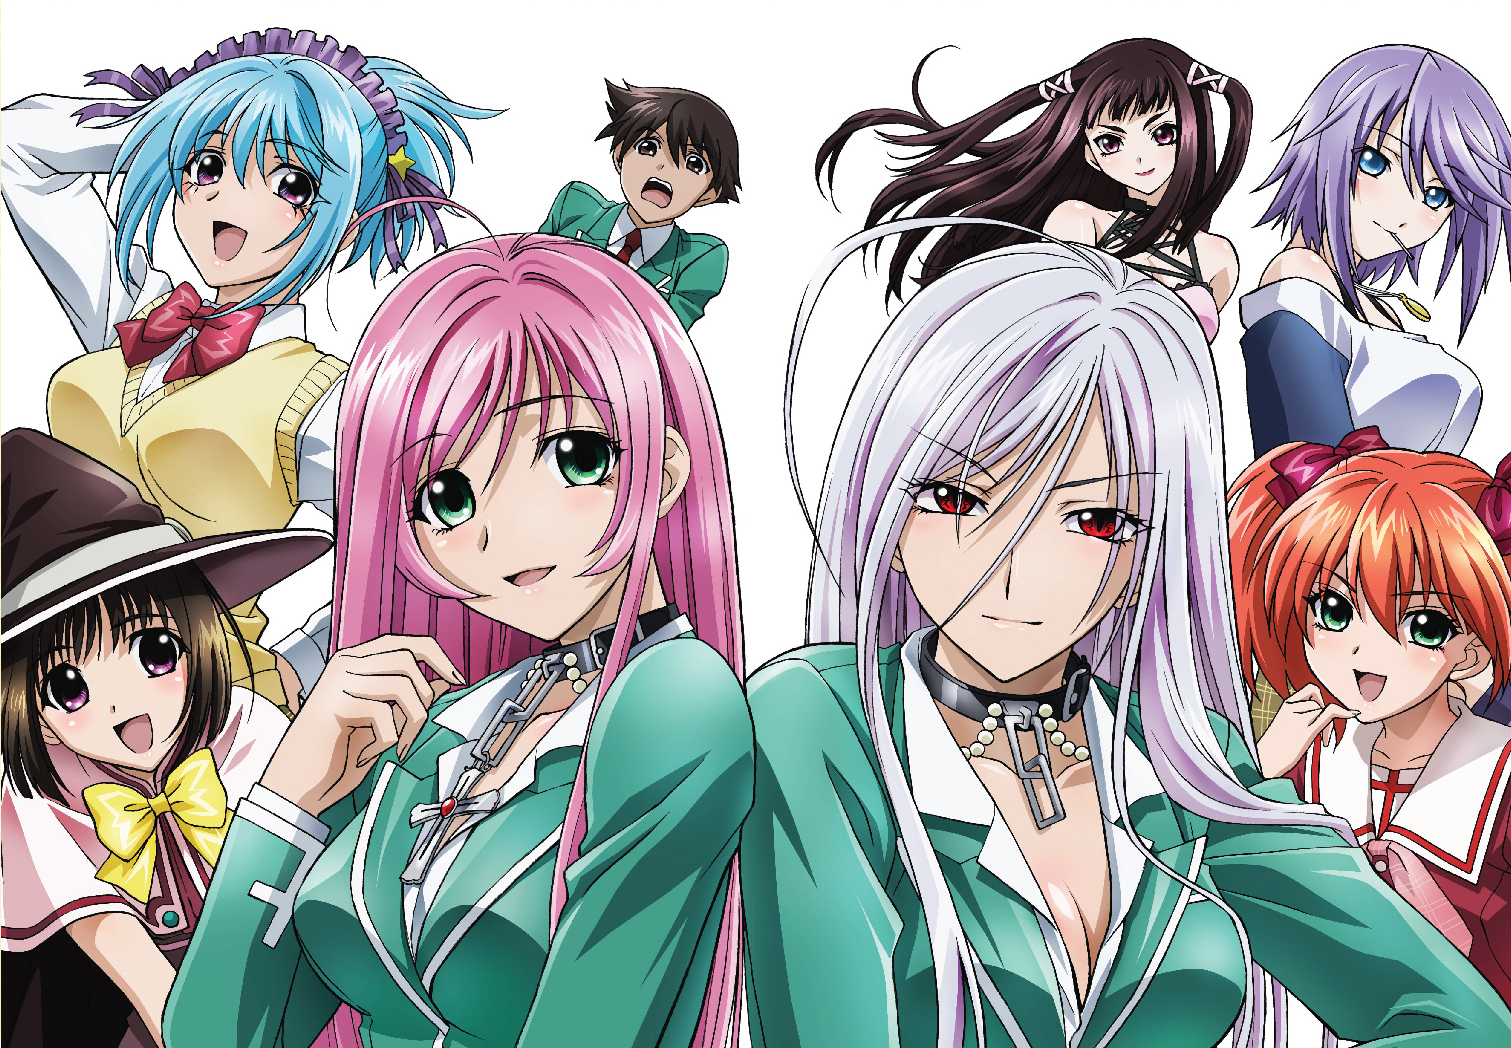 Download Join Tsukune and Moka in the wild world of Rosario Vampire  Wallpaper | Wallpapers.com